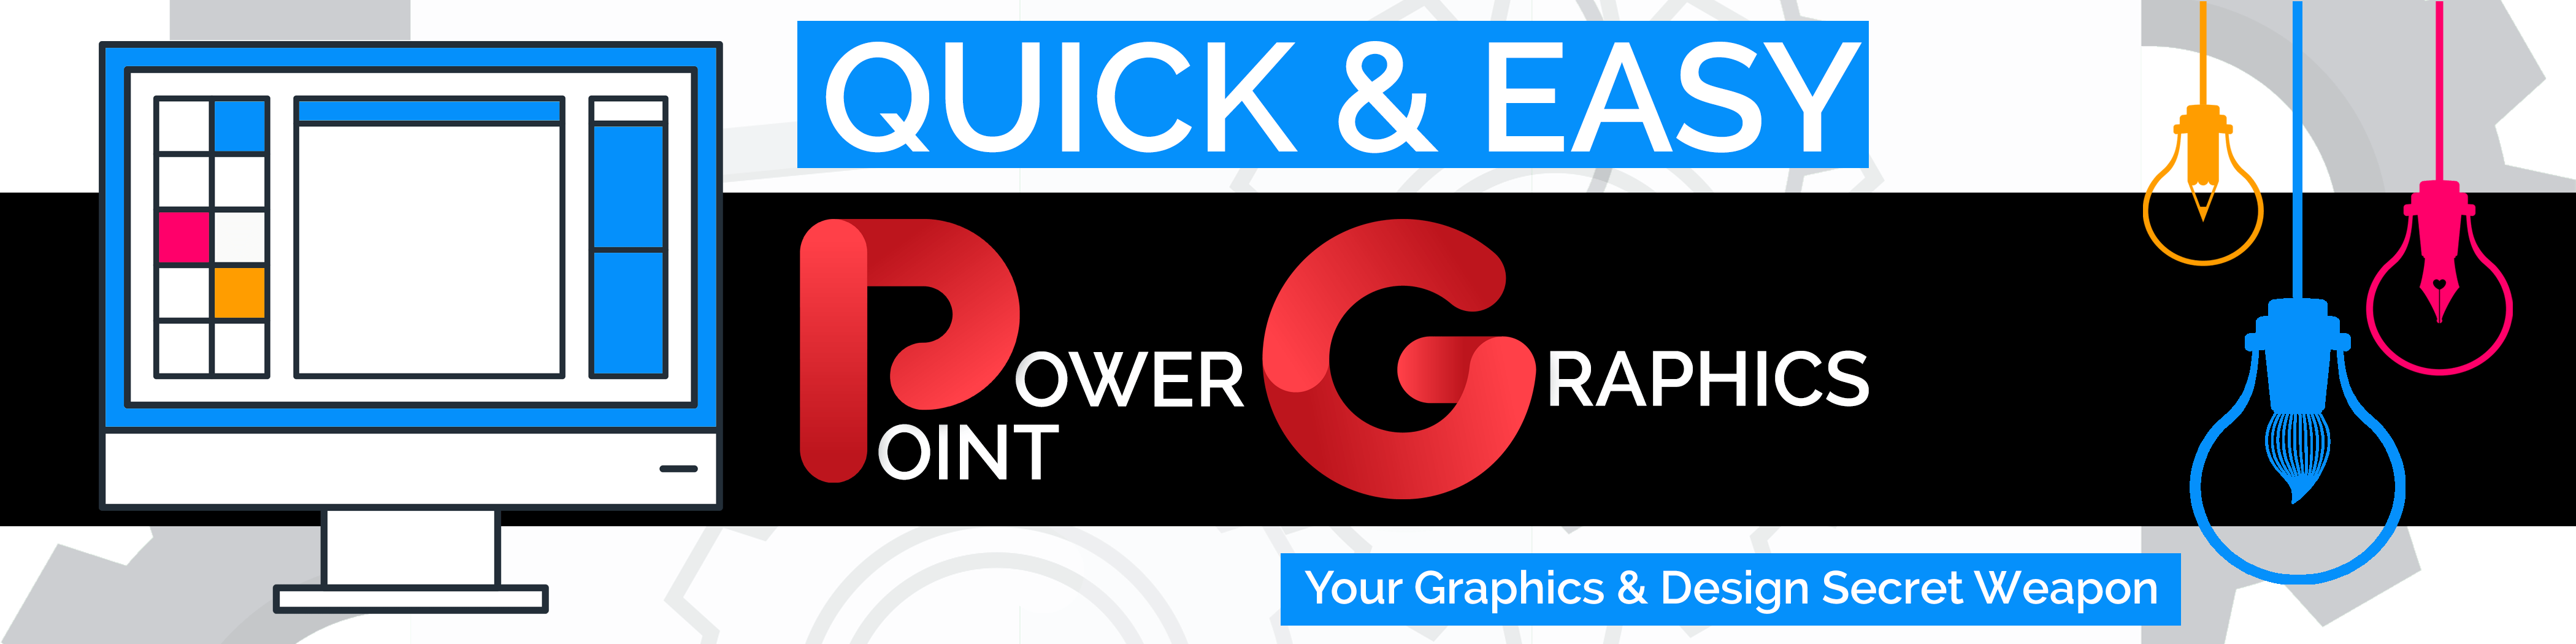 Shawn Hansen - Quick and Easy Powerpoint Graphics